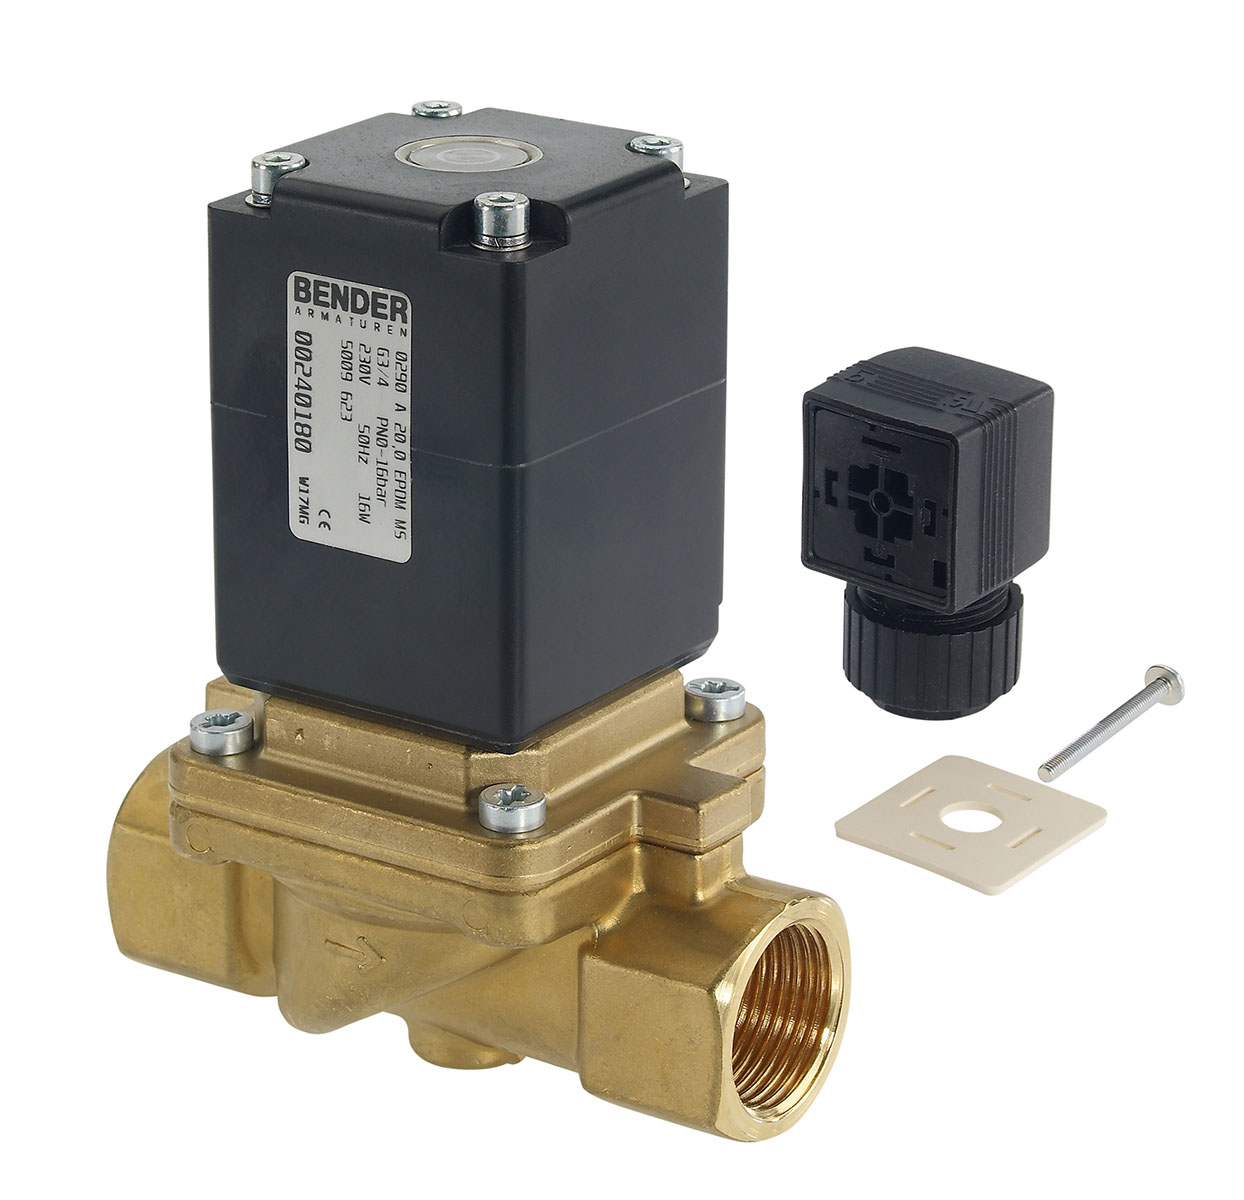 5009635 - 2/2 way solenoid valve normally closed for not flammable gas and fluids Type 6; female thread